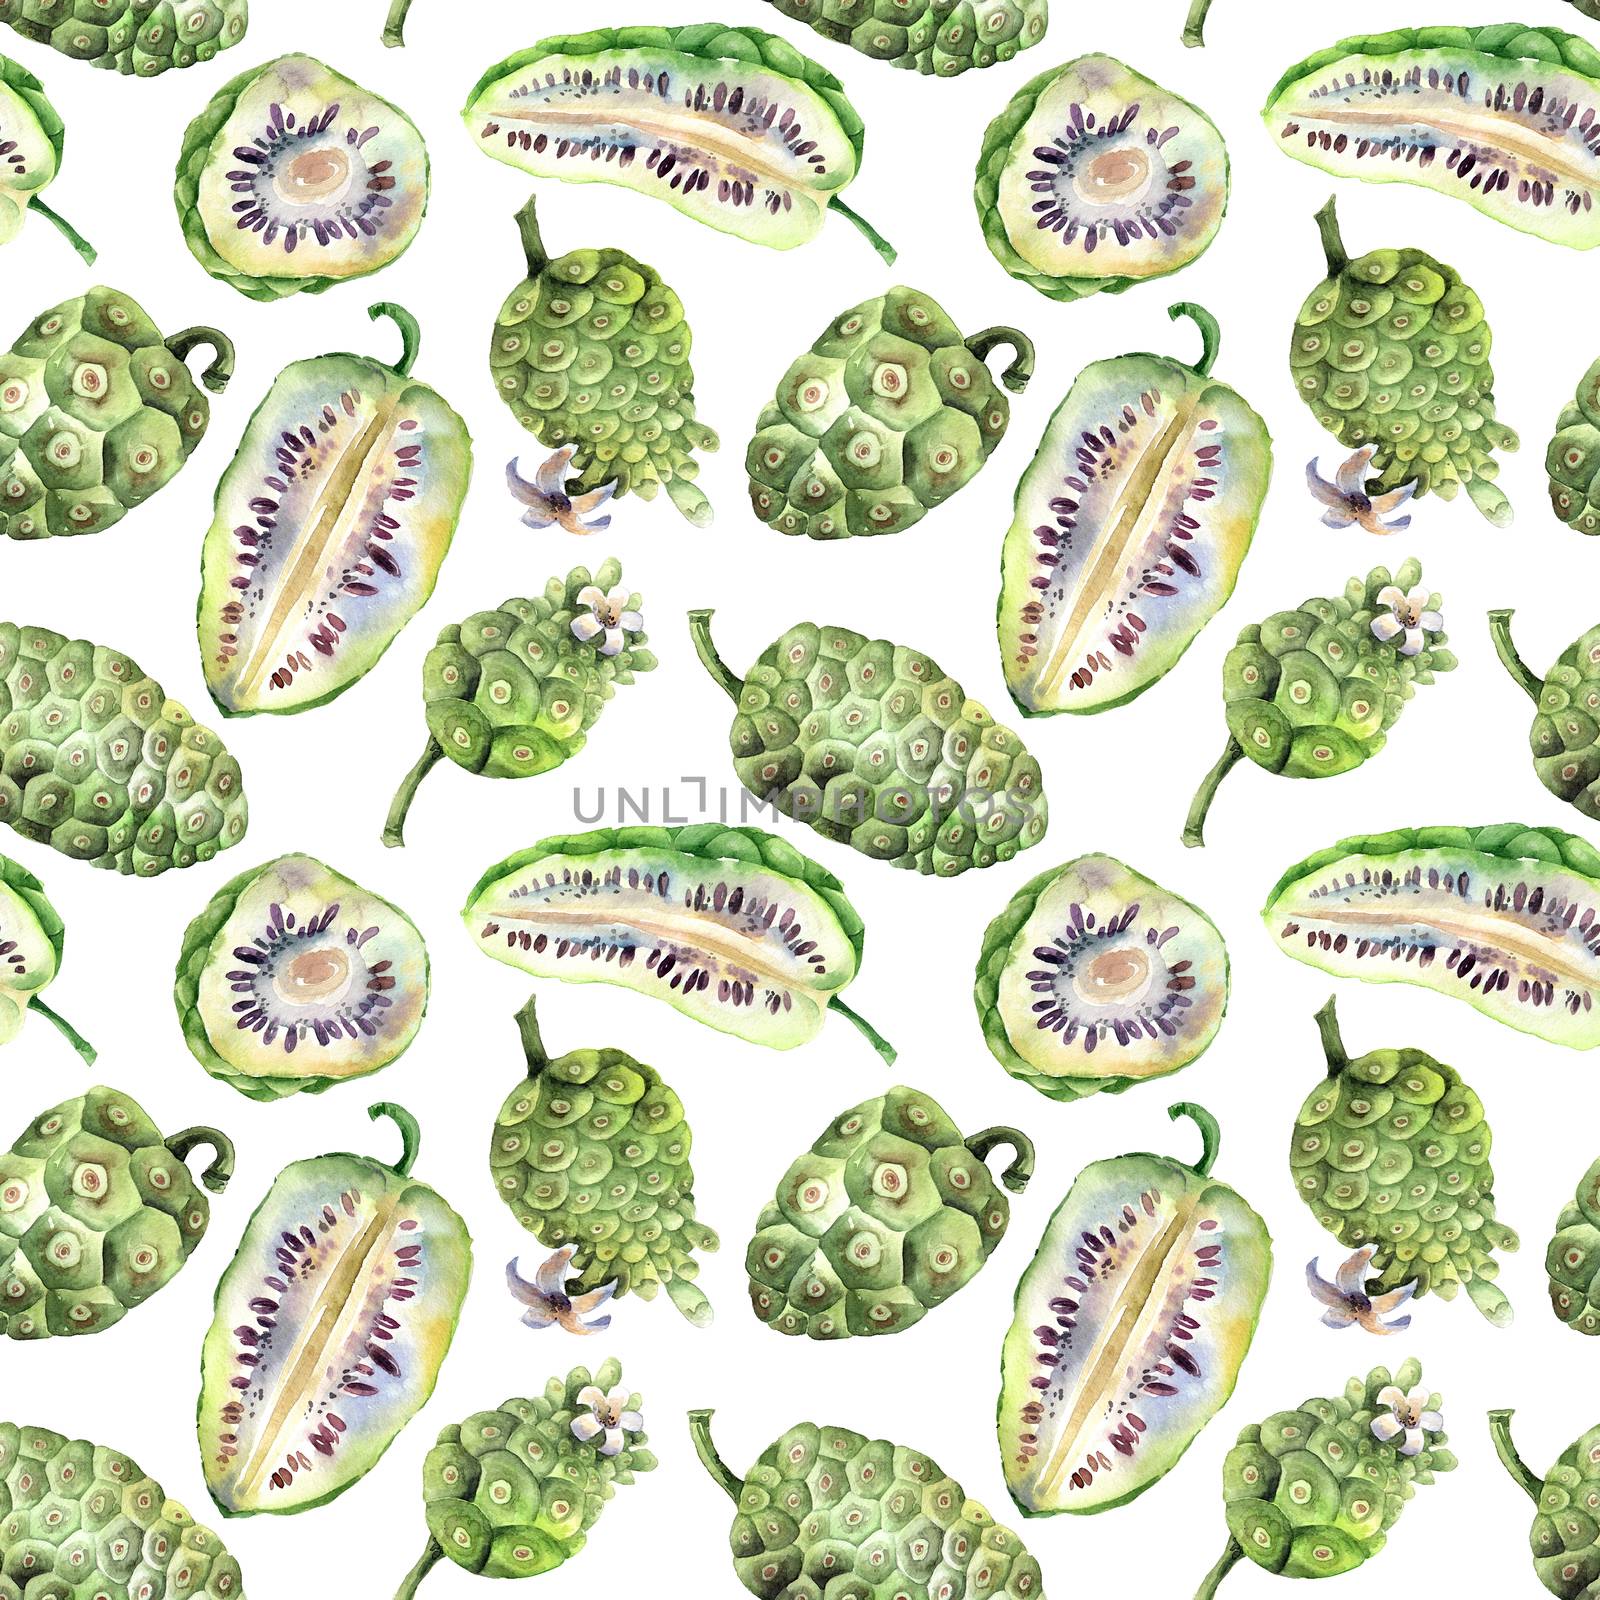 Watercolor painted illustration of noni fruits - complete and cropped fruits. Set of illustrations on white background. Seamless pattern.